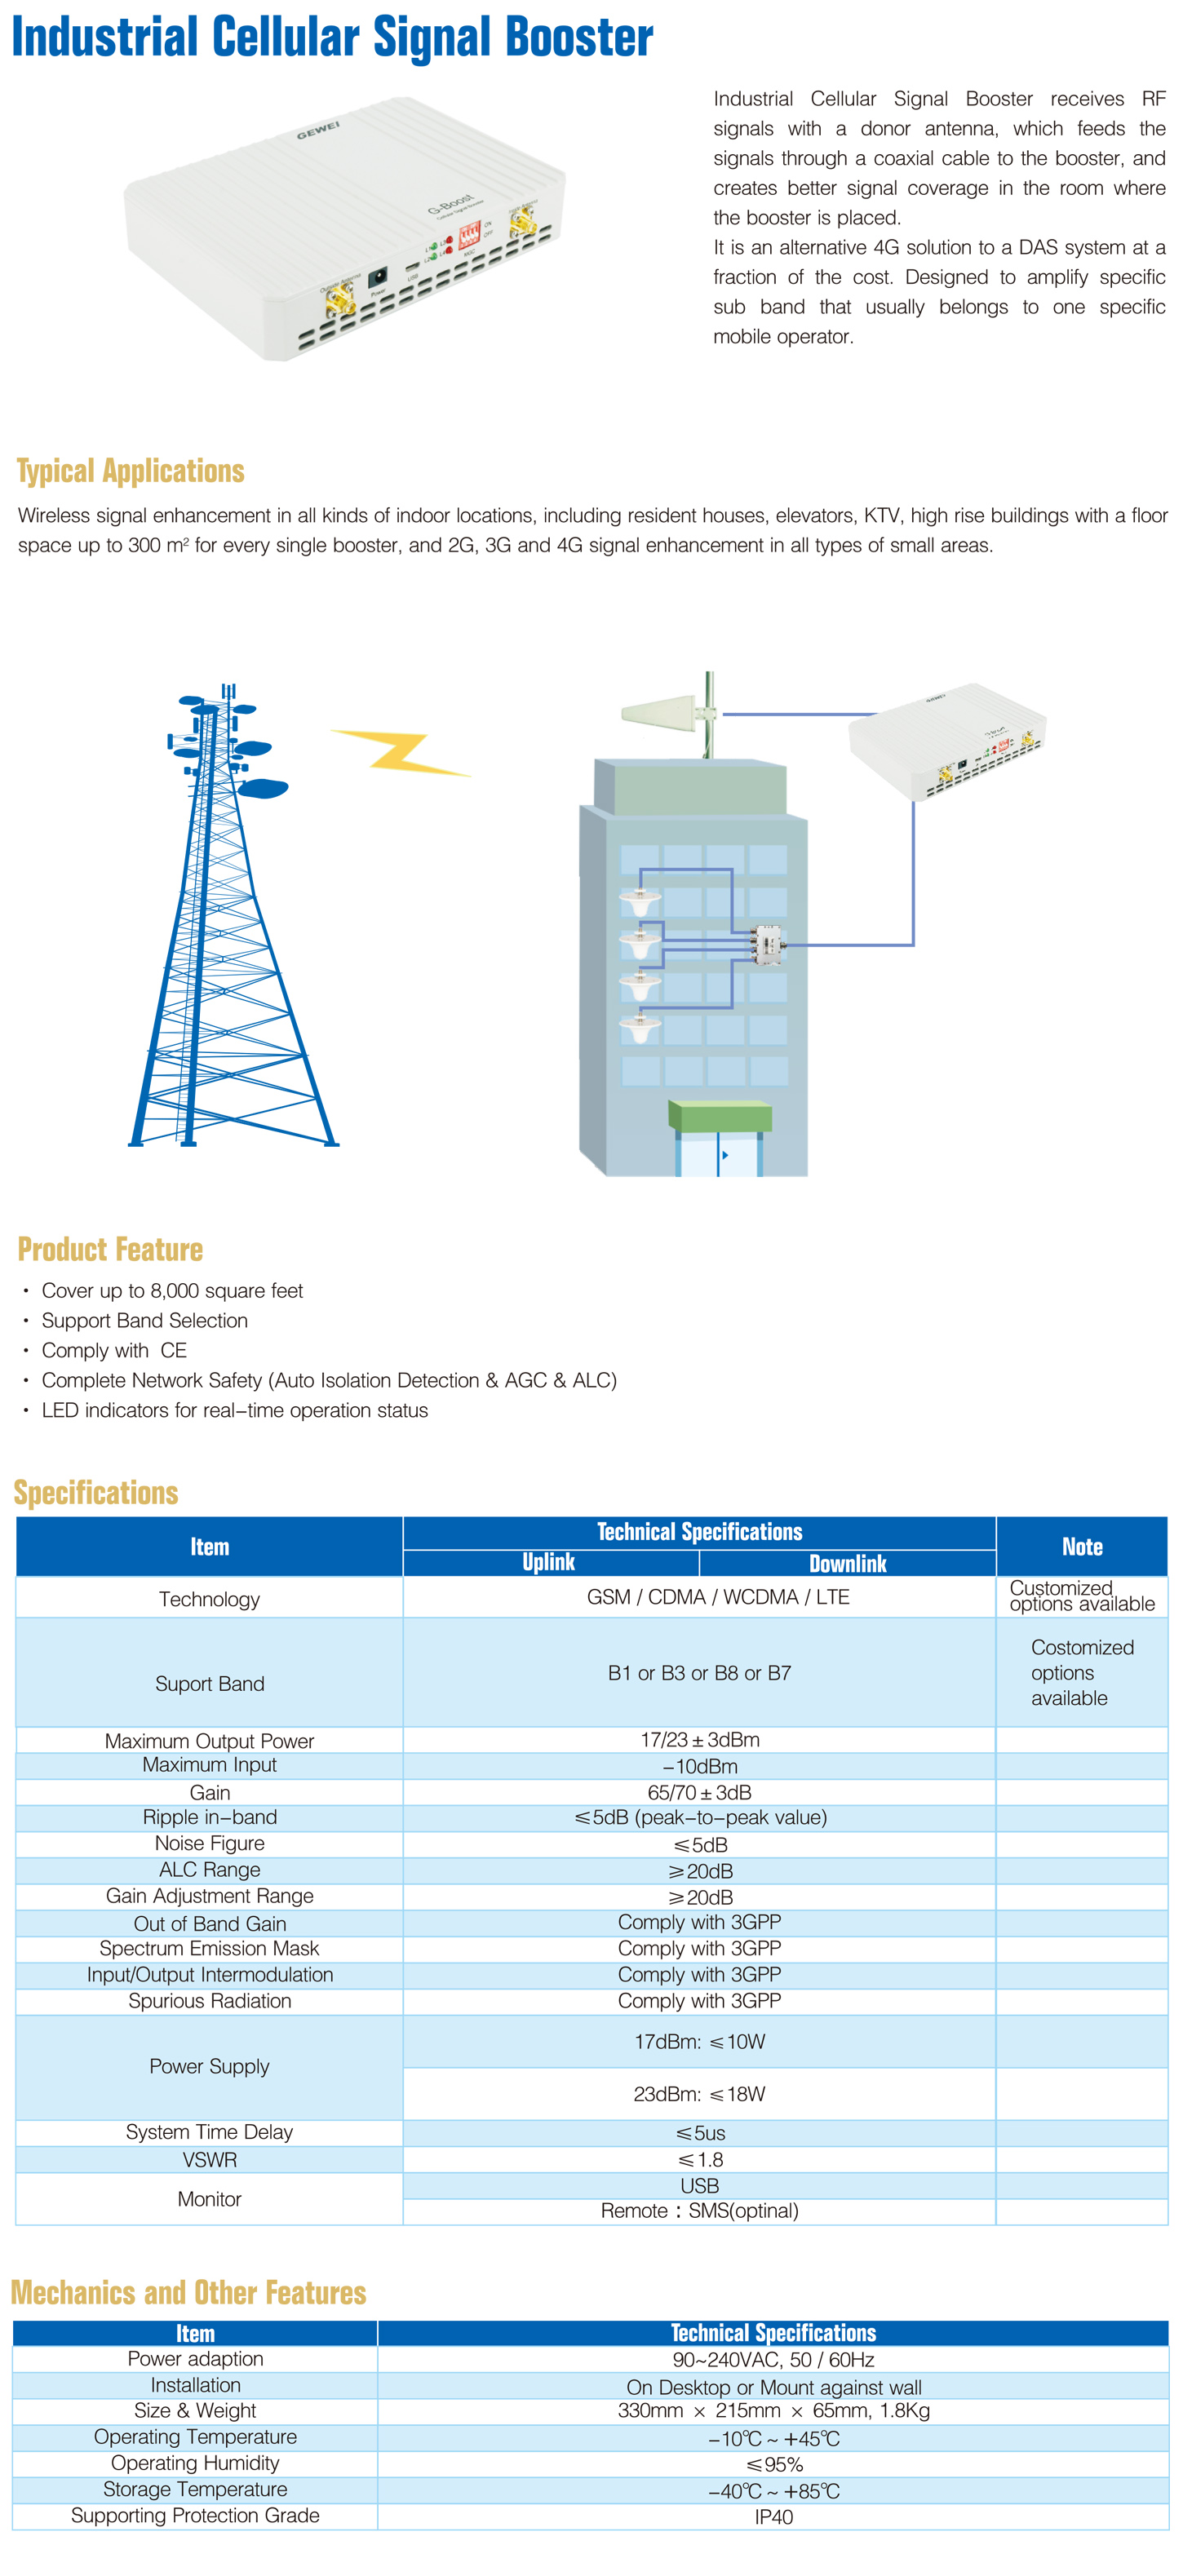 Industrial Cellular Signal Booster